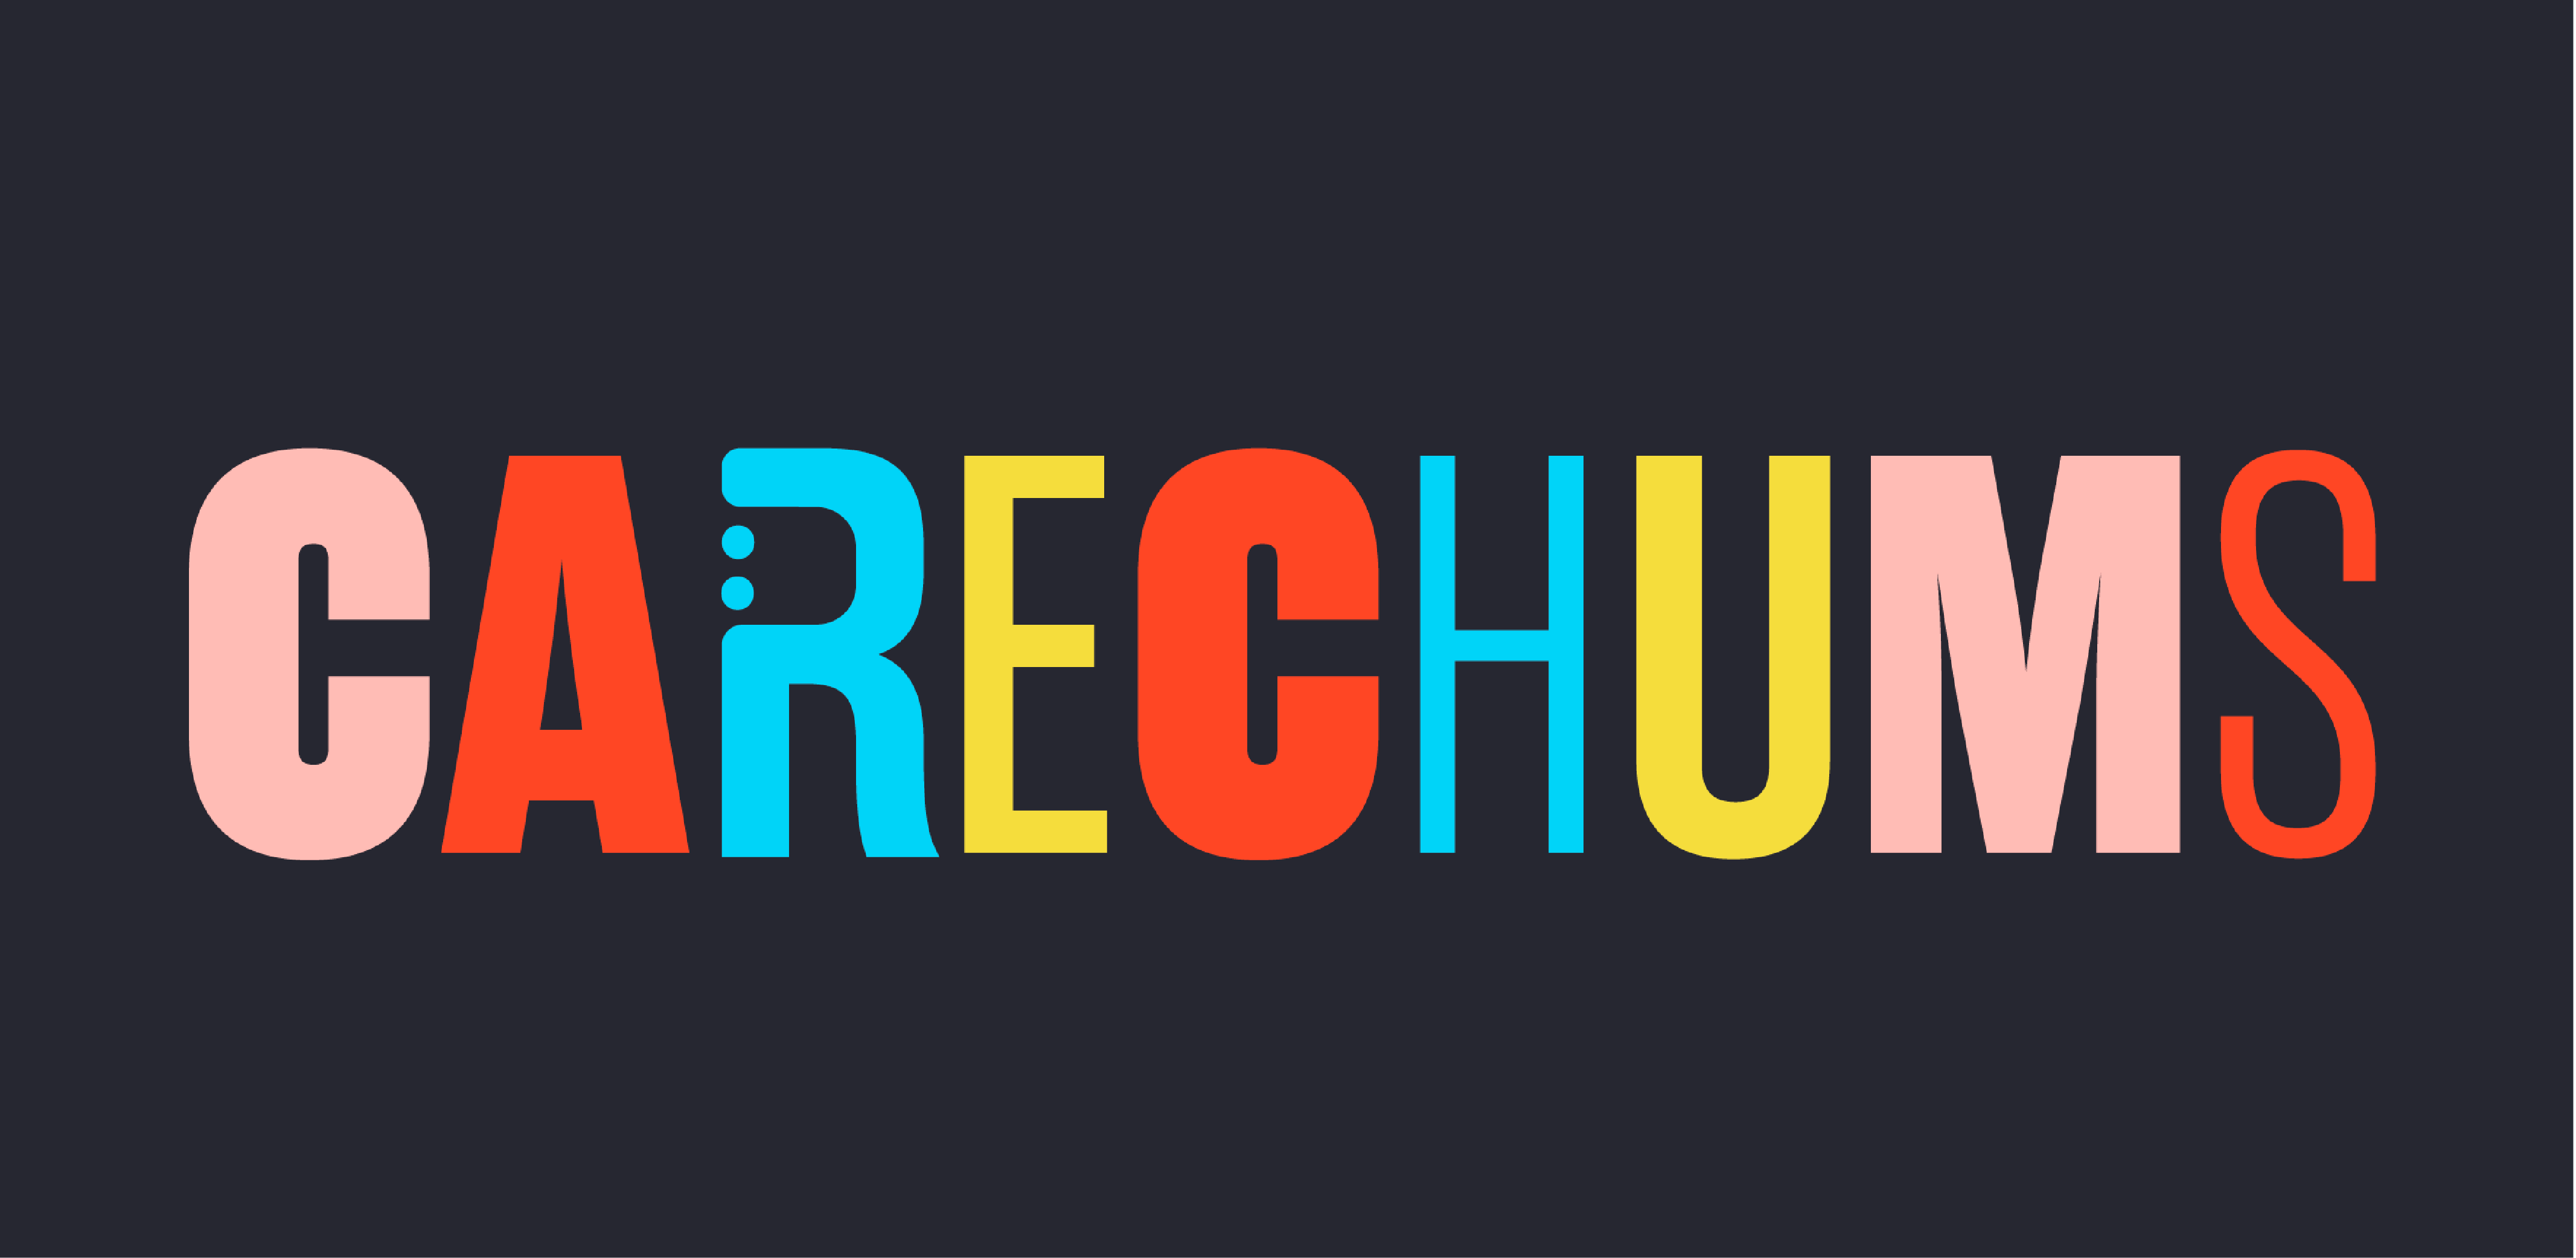 Typographic image of the Carechums logo